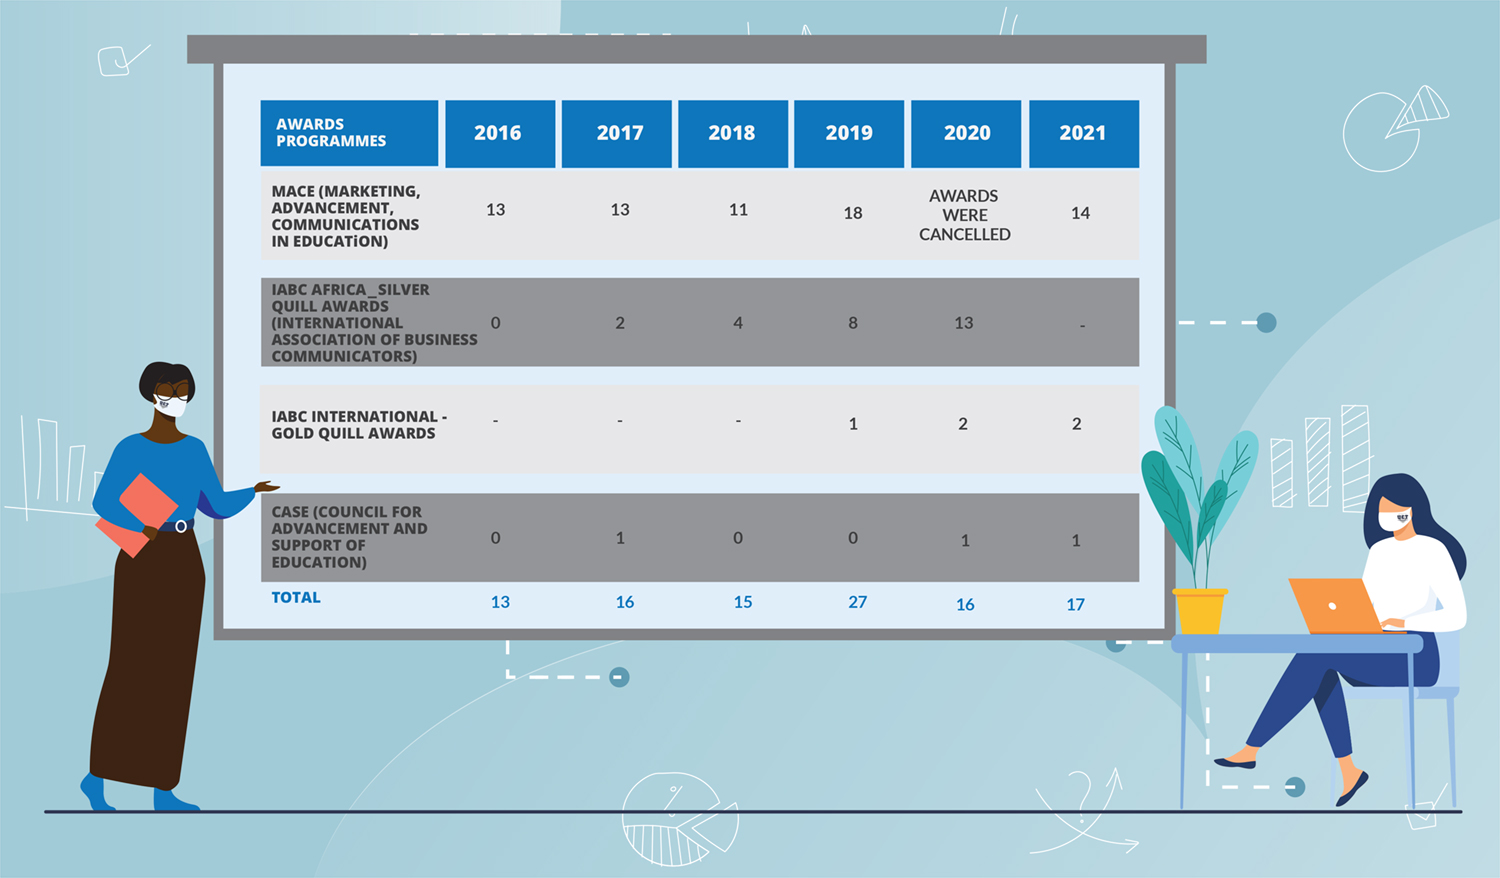 CMD Annual Report 2020 - Our Awards Infographic